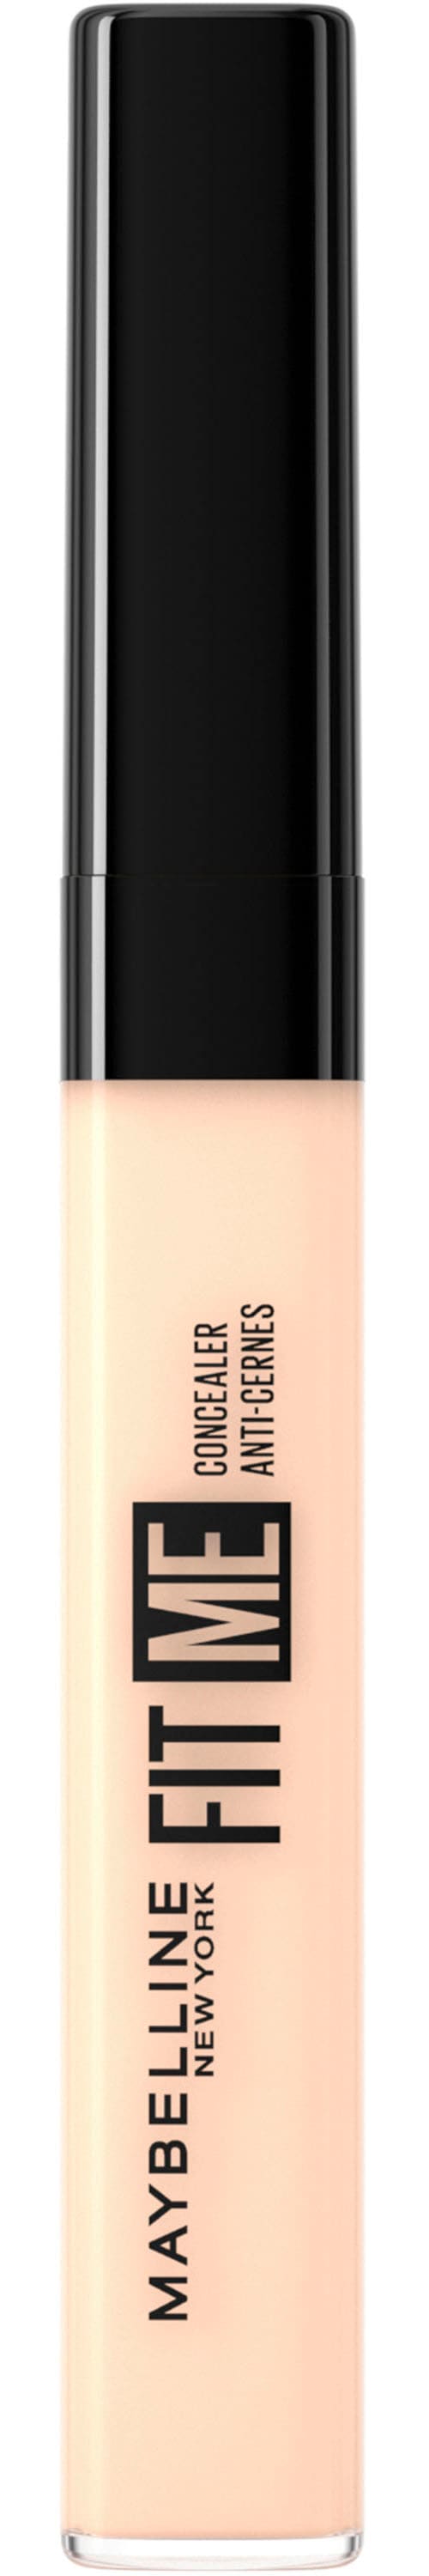 YORK bei MAYBELLINE ME« »FIT ♕ NEW Concealer